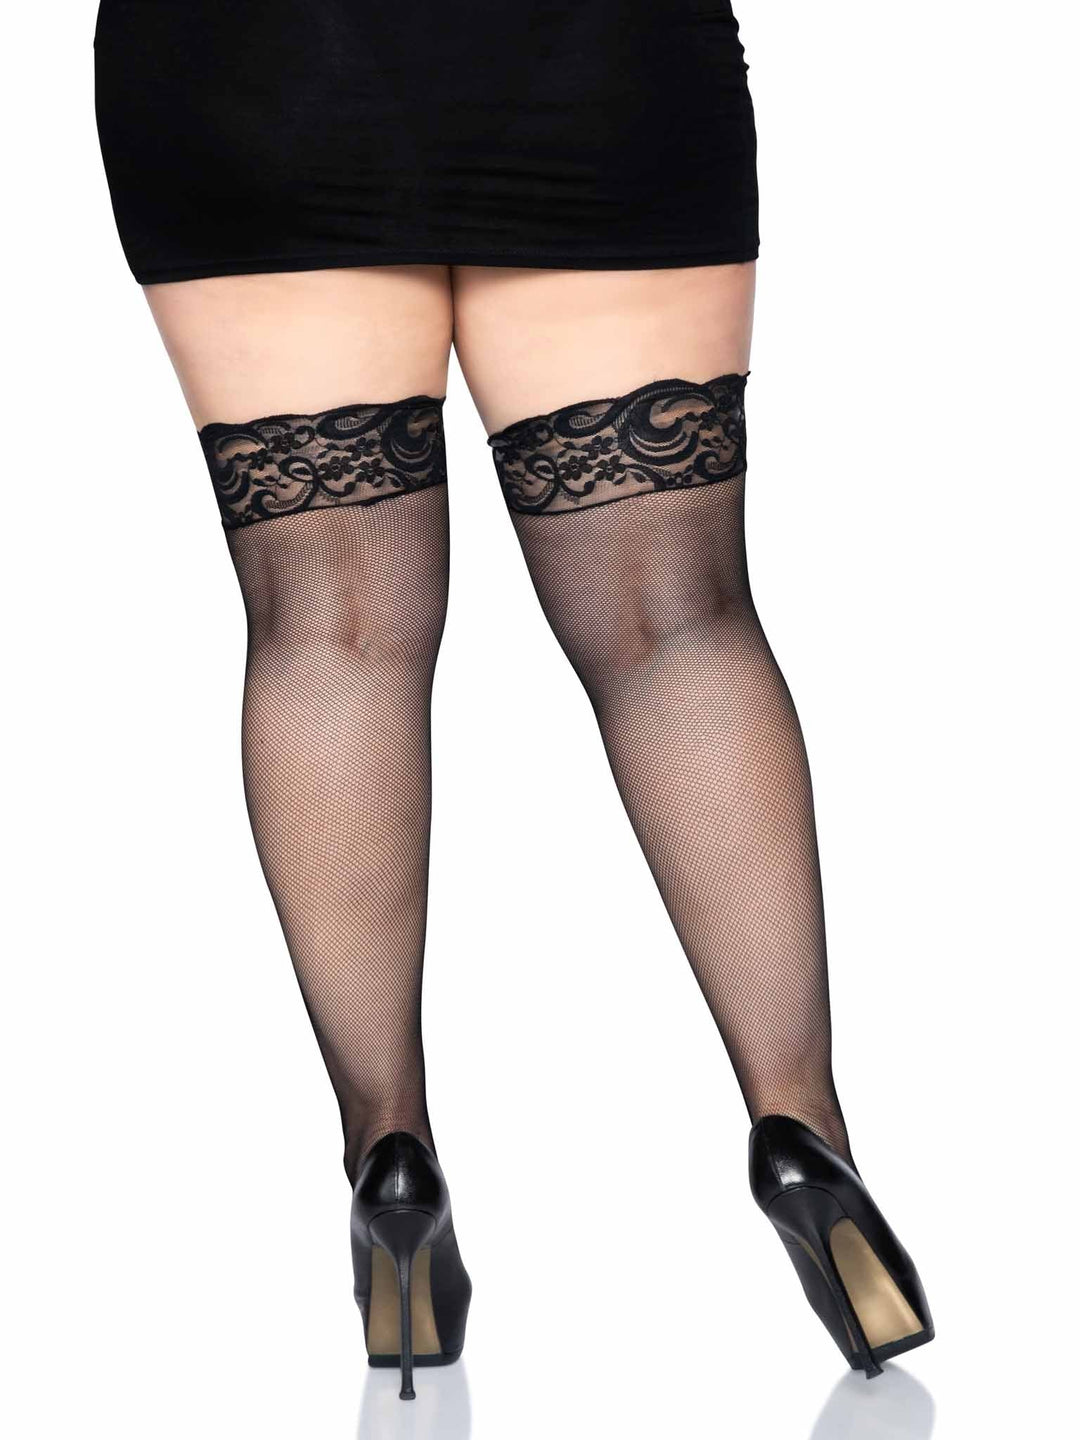 Image of the back of the Stay Up Lace Top Micro Net Thigh Highs available up to 1X/2X size.